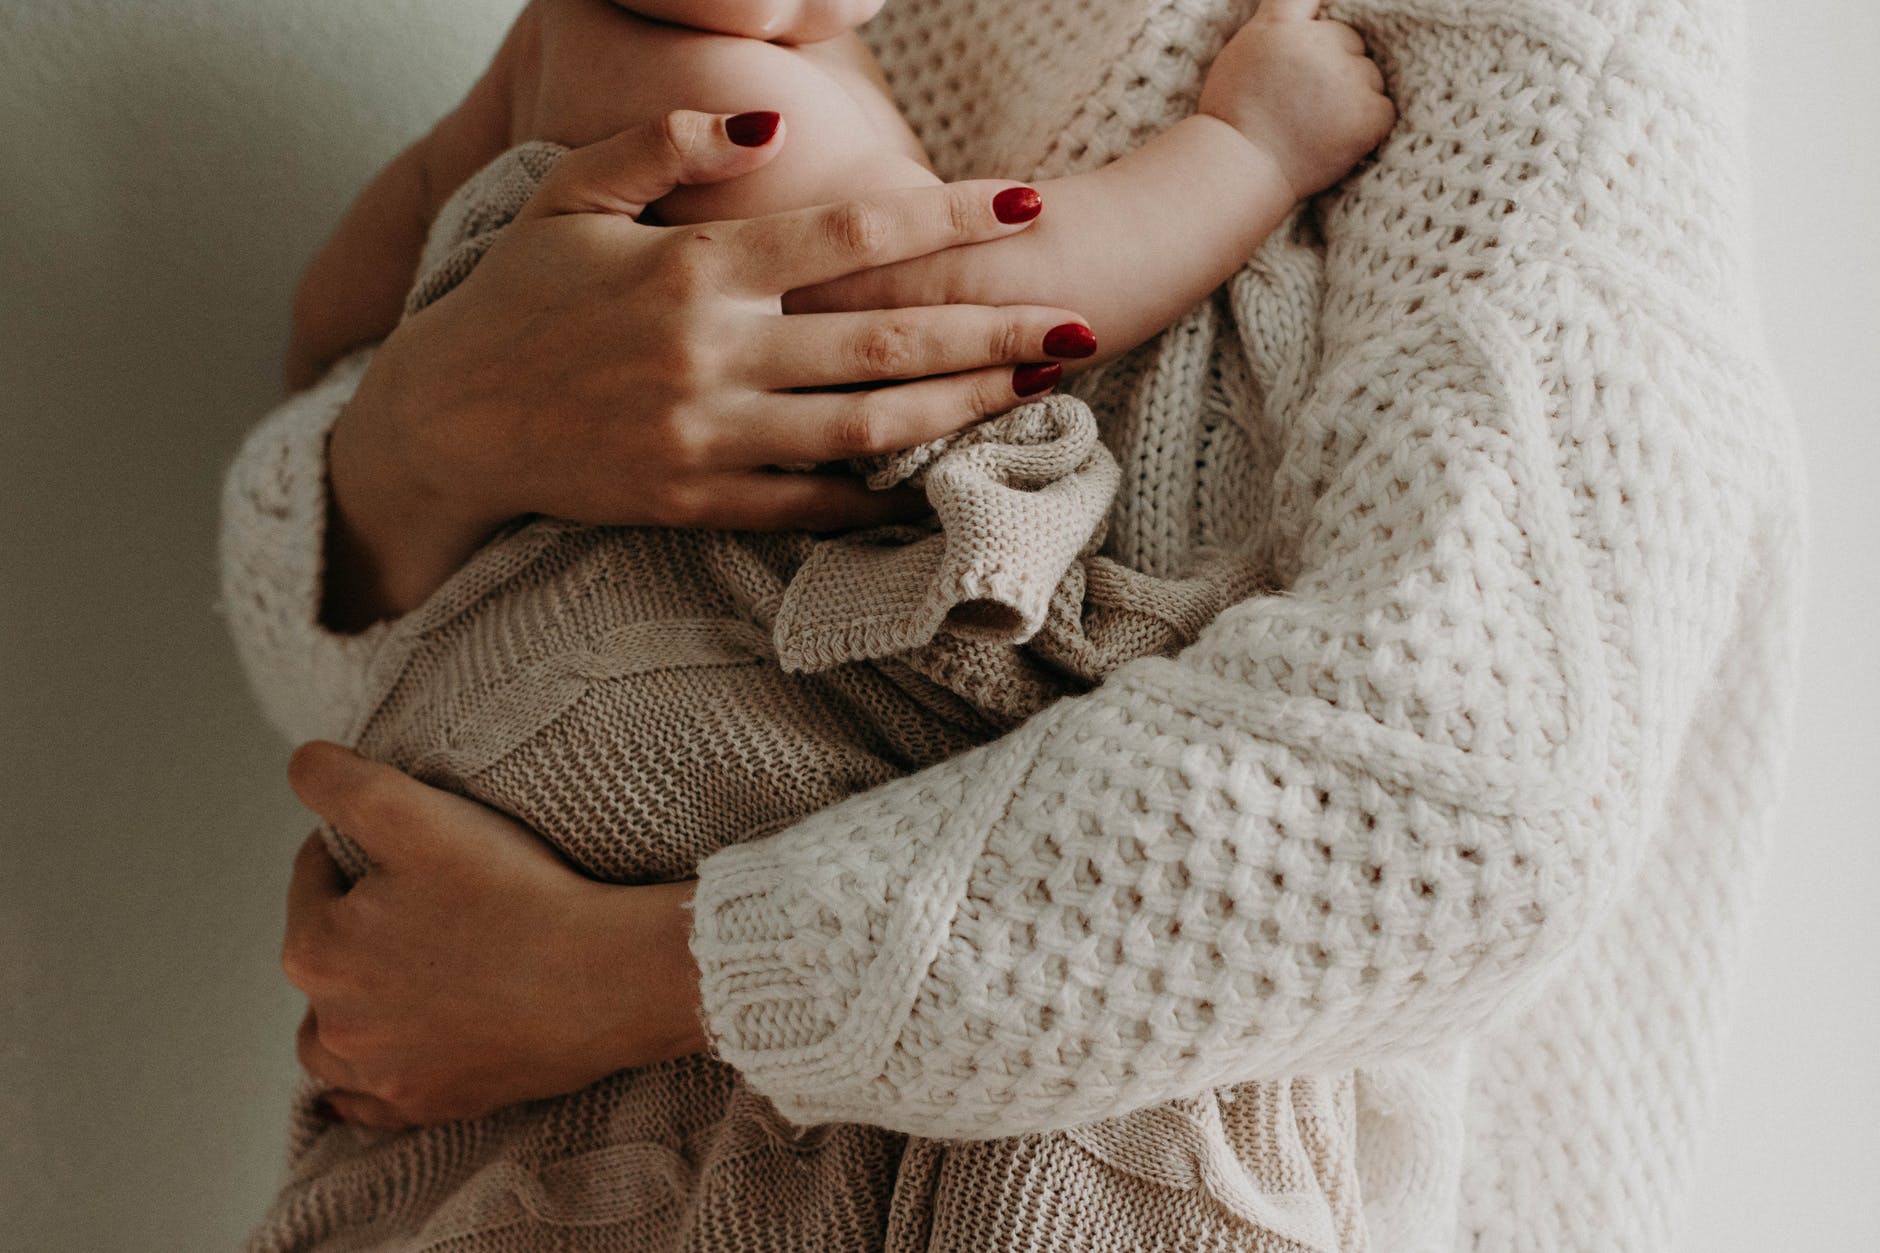 Alana holding her baby | Source: Pexels